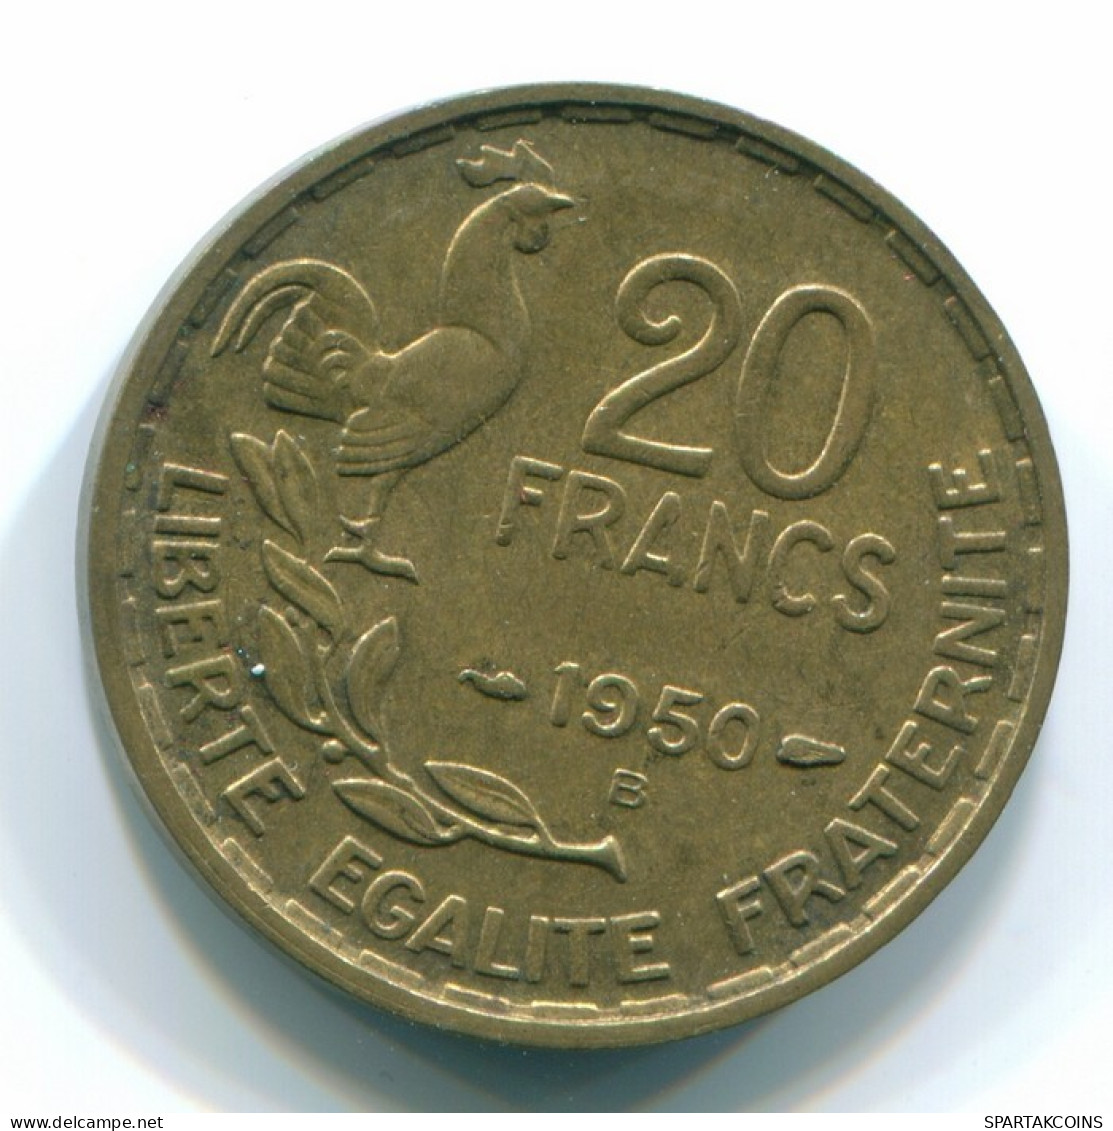 20 FRANCS 1950 B FRANCE Coin GEORGES GUIBAUD-3 PLUMES RARE XF+ #FR1153.36.U.A - 20 Francs